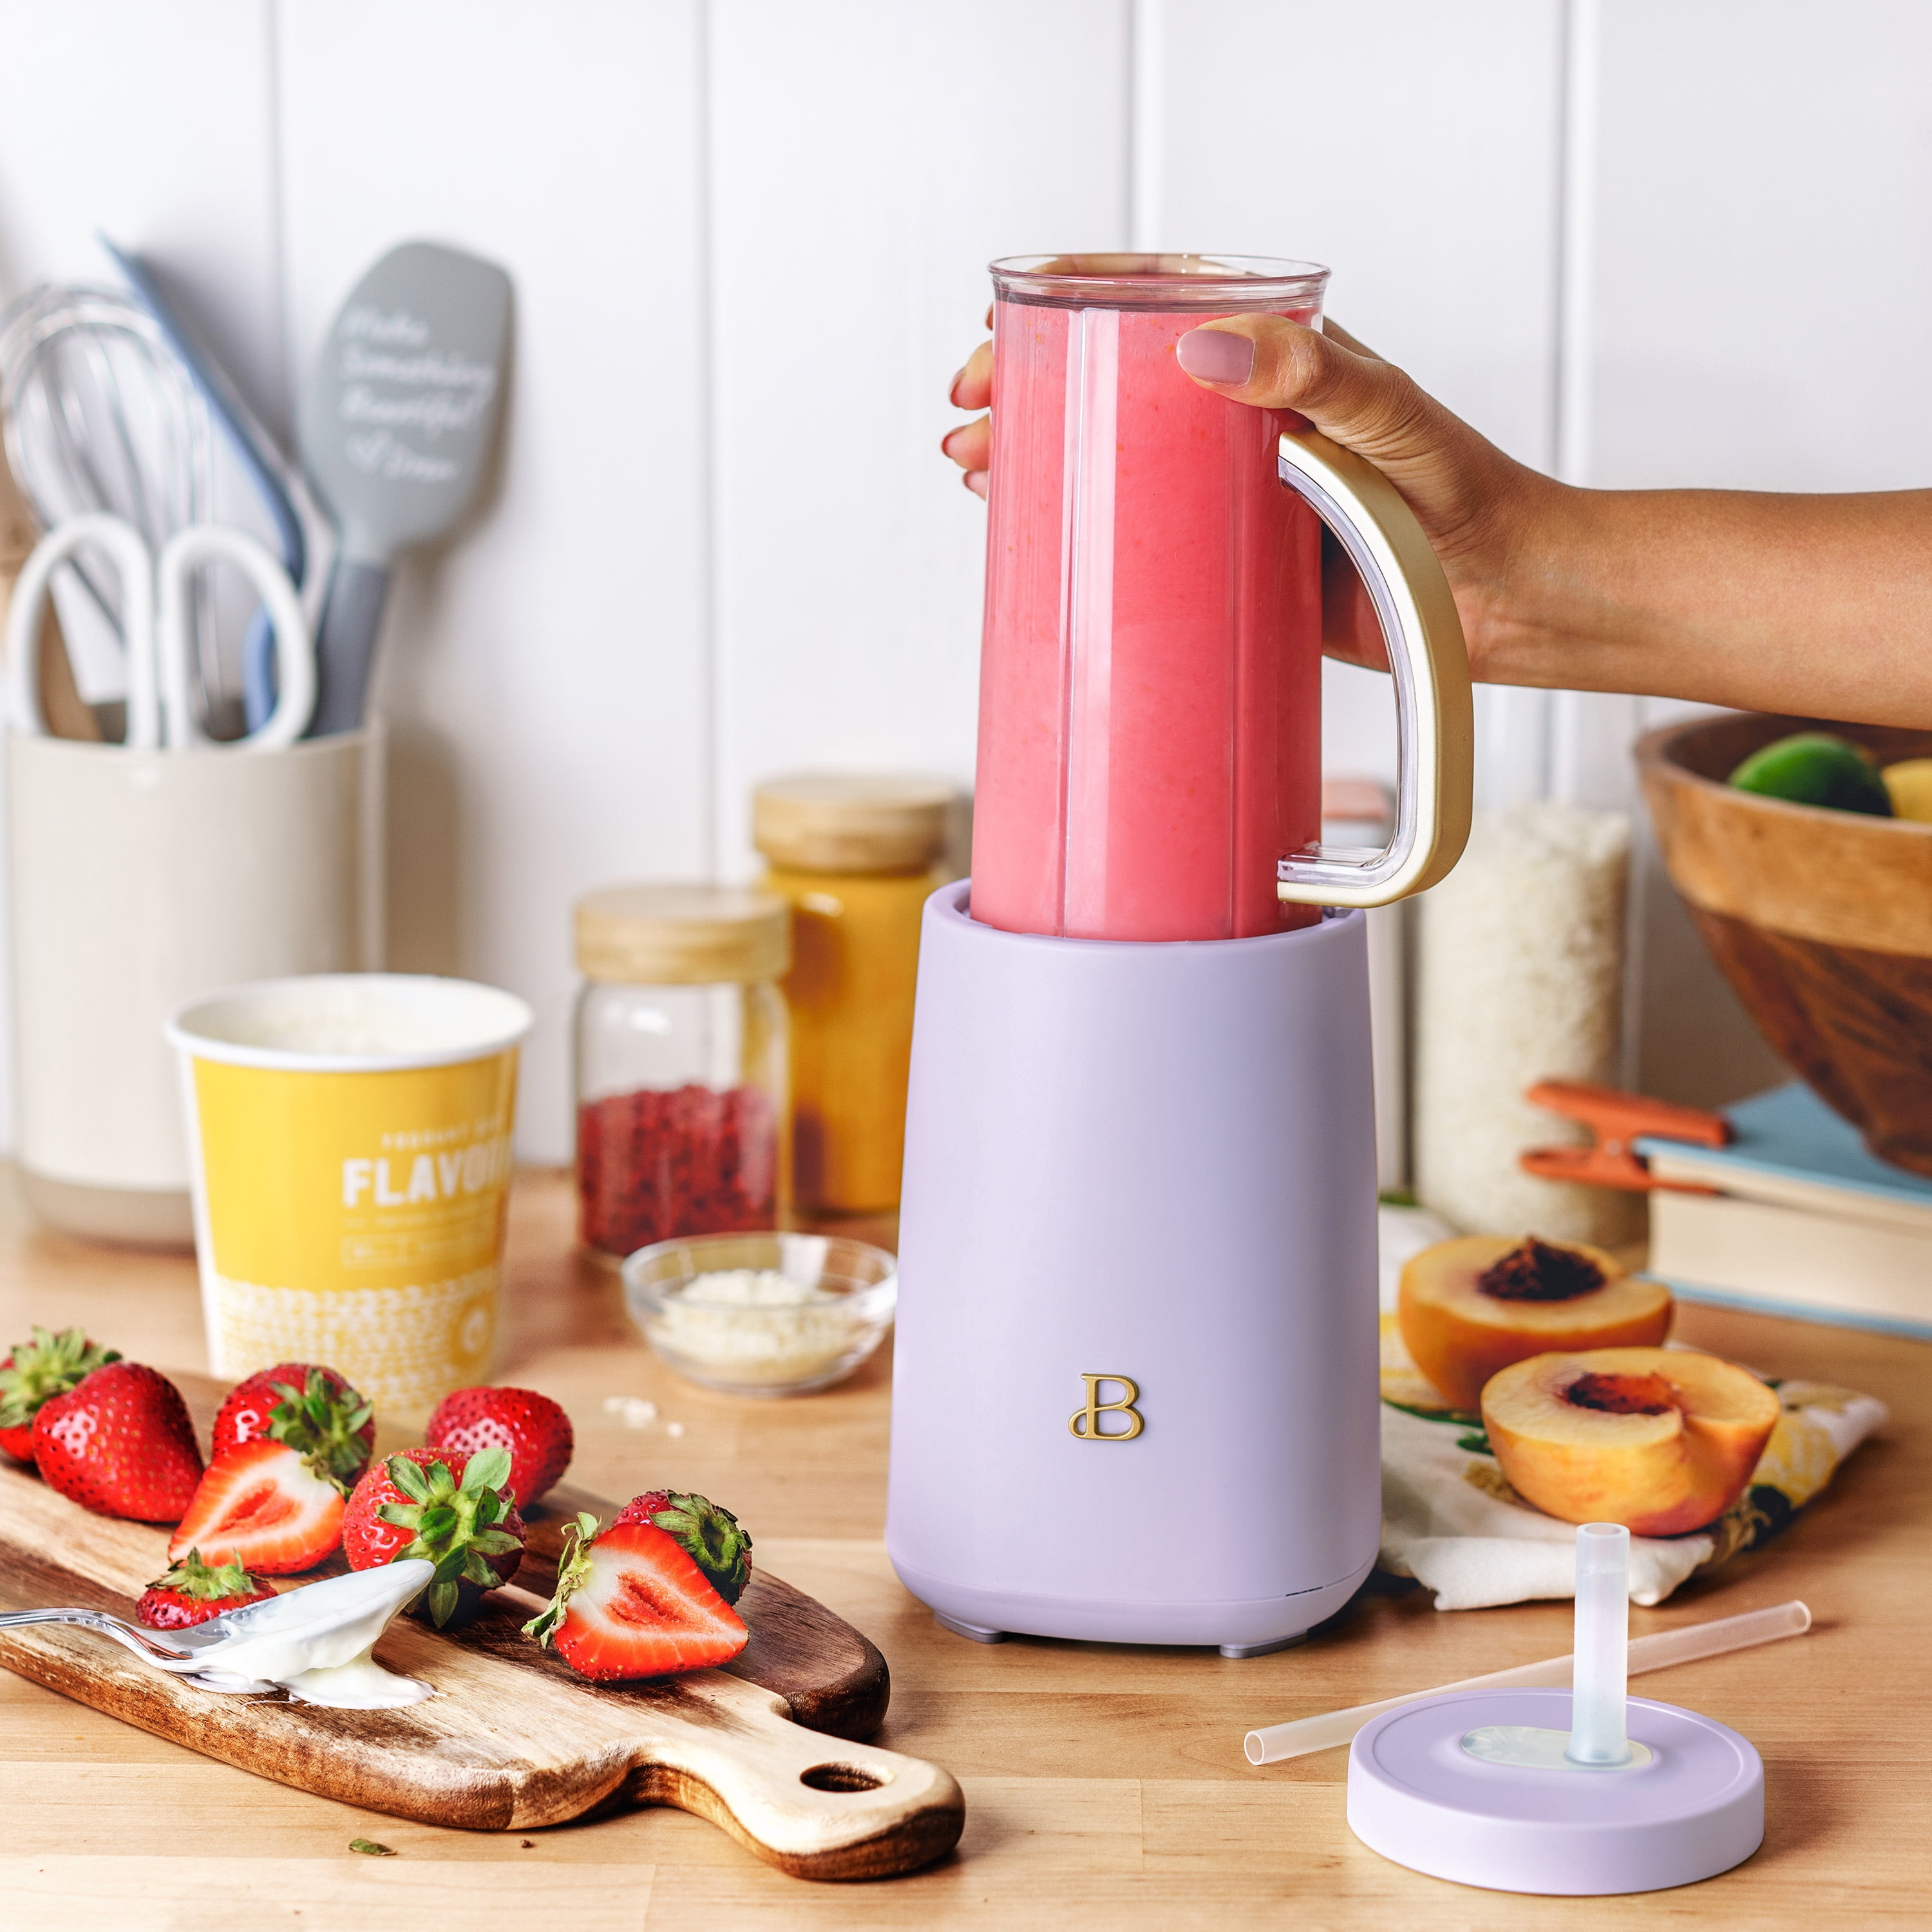 DREW BARRYMORE APPLIANCES AT WALMART - TOASTER AND IMMERSION BLENDER —  KENDRA FOUND IT